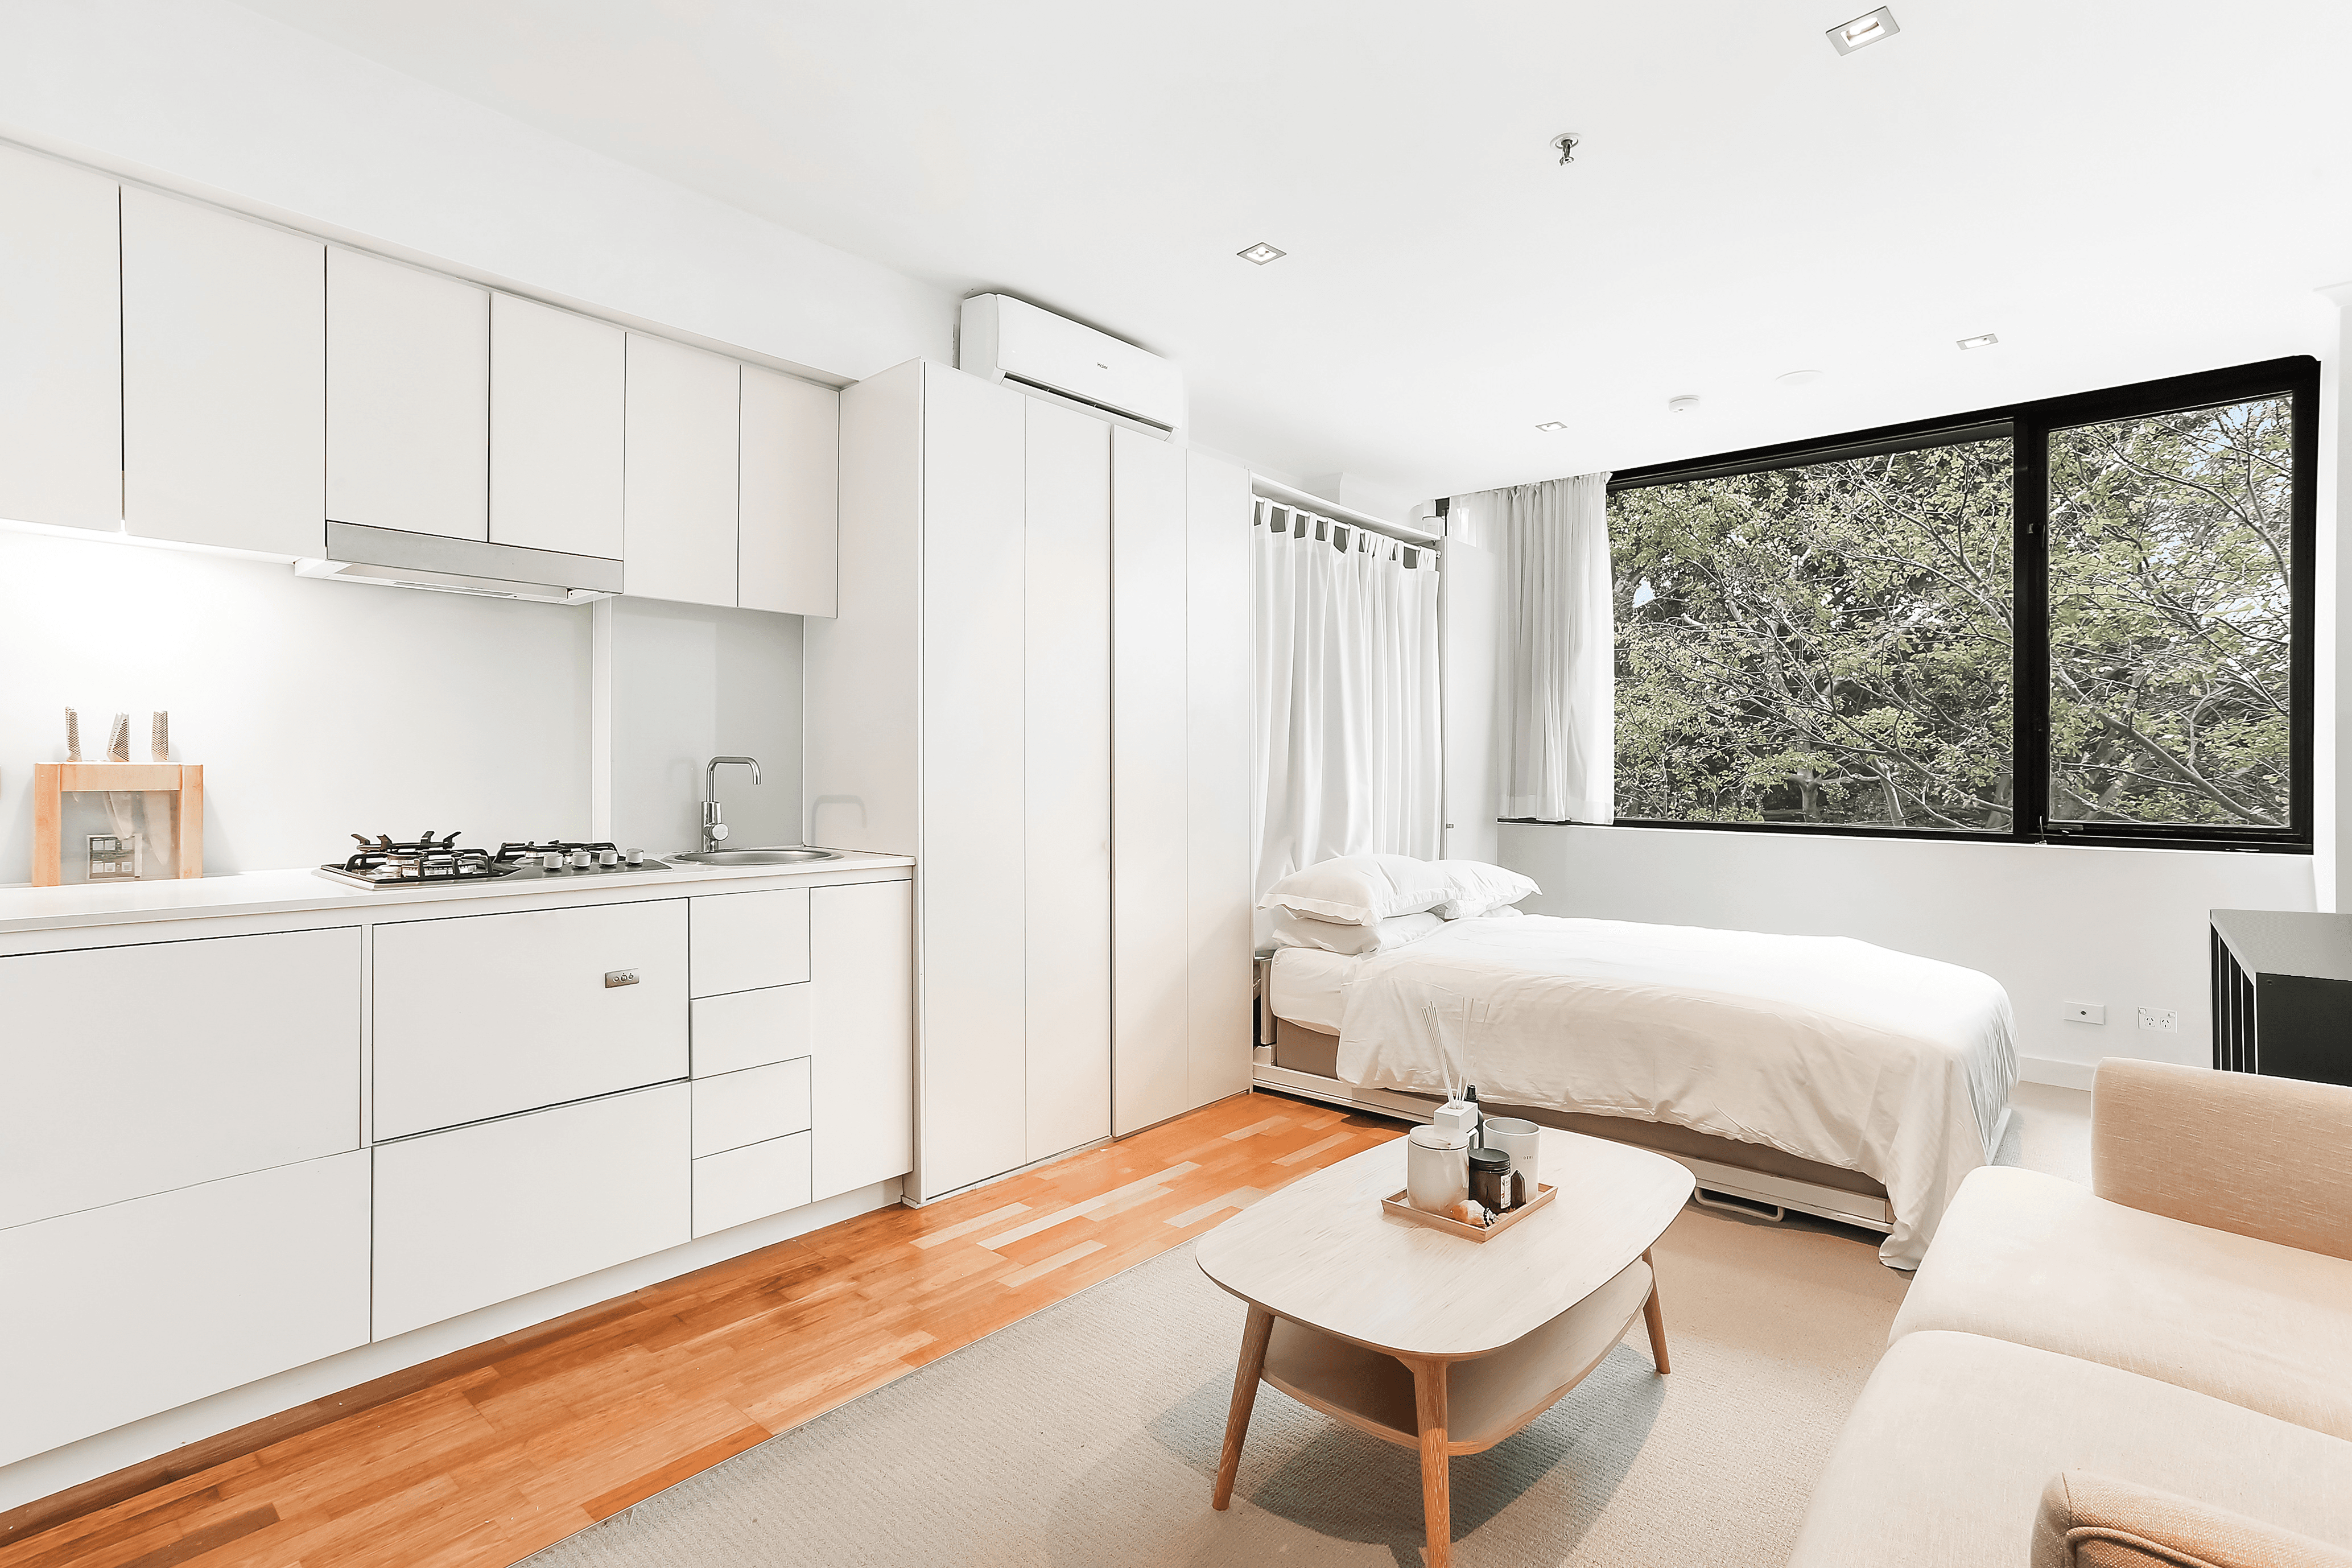 205/85-97 New South Head Road, EDGECLIFF, NSW 2027